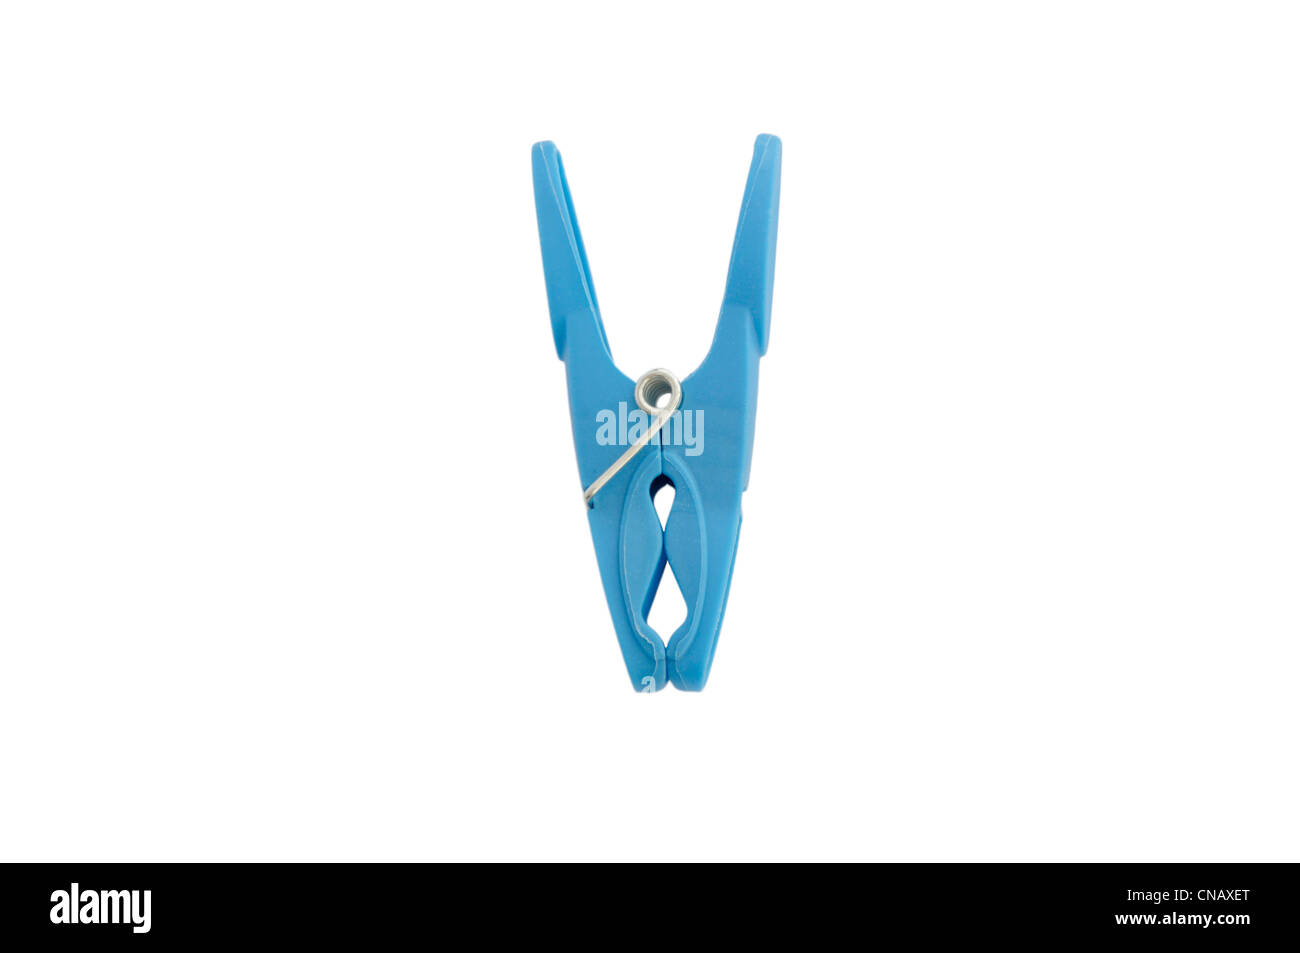 Blue Clothes Peg on a White Background Stock Photo